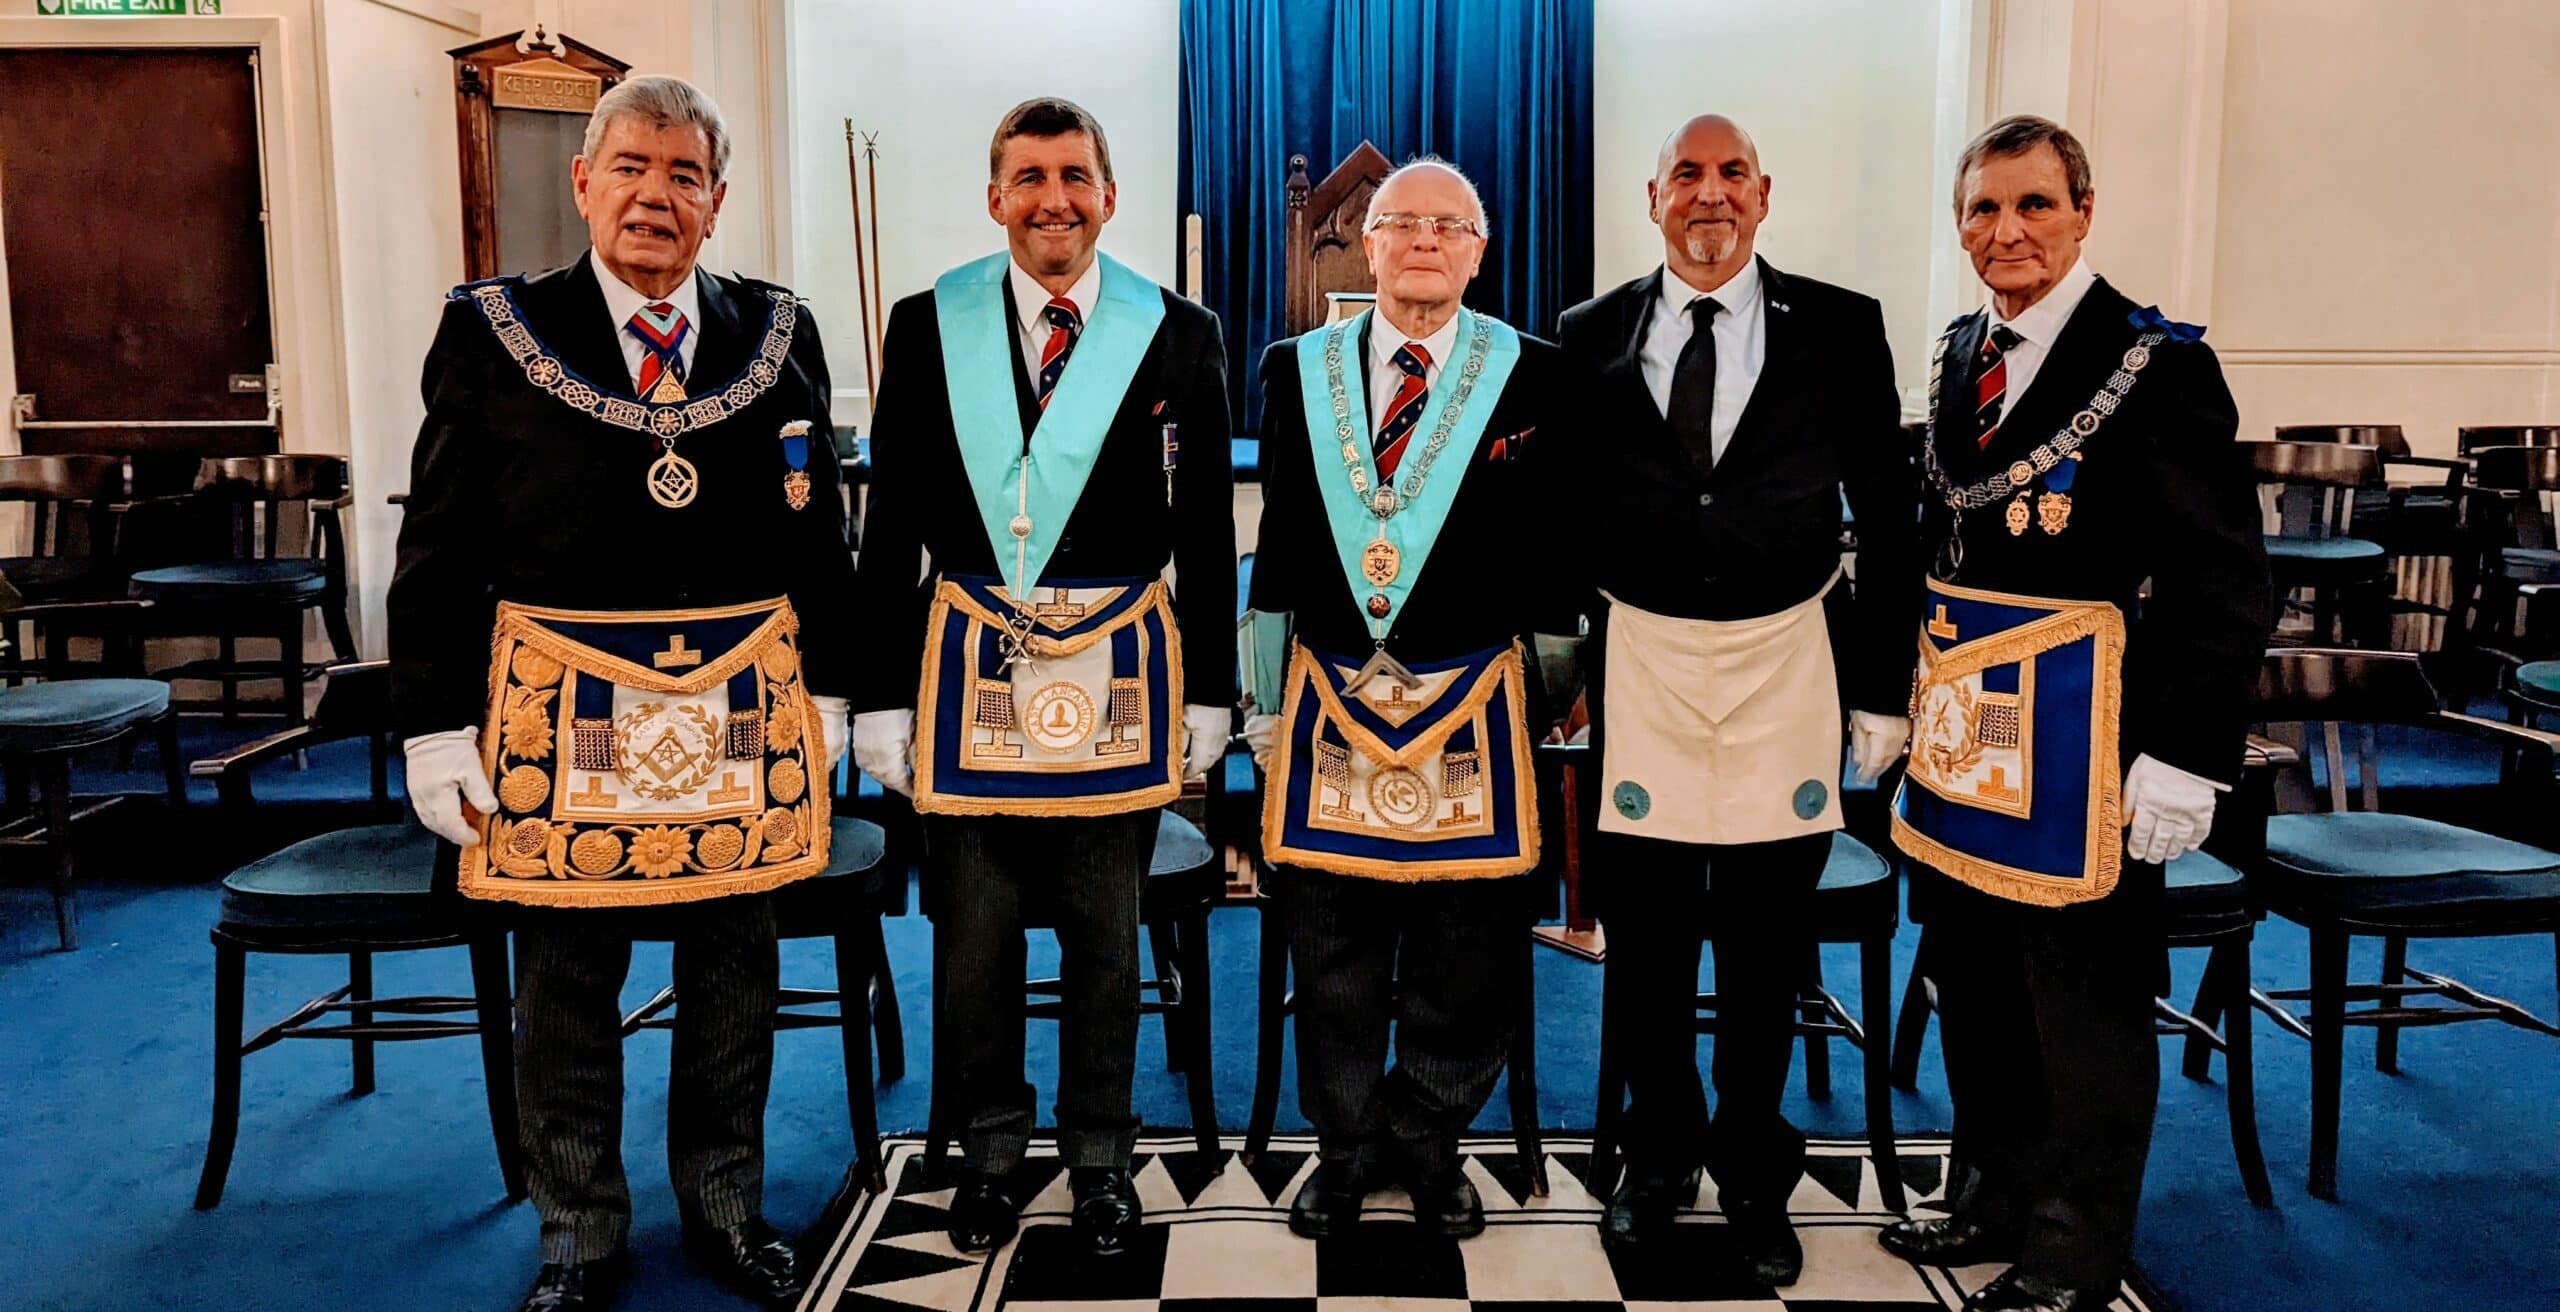 Keep Lodge No. 6538 Welcome The RW Provincial Grand Master